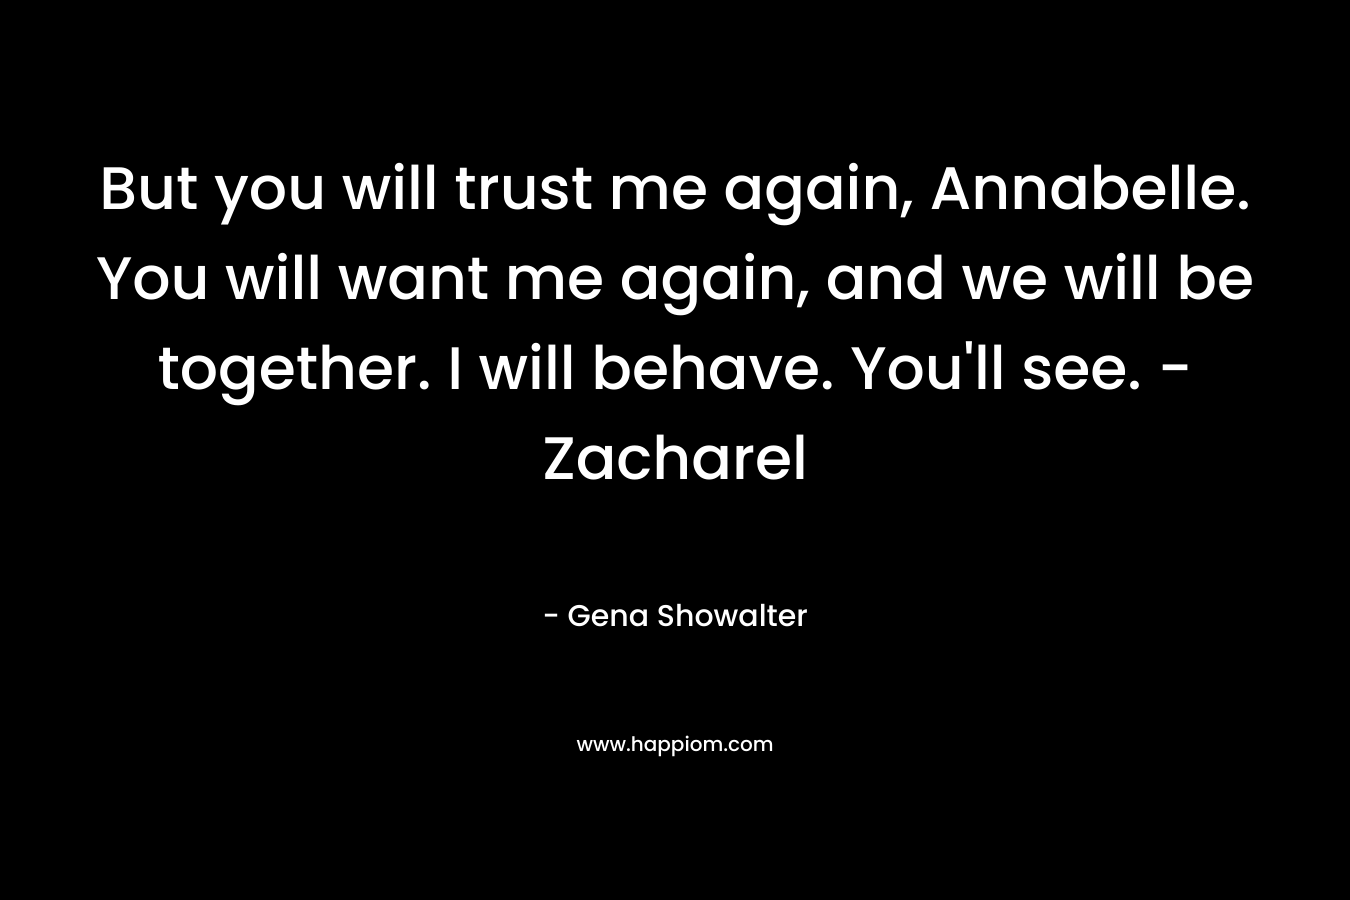 But you will trust me again, Annabelle. You will want me again, and we will be together. I will behave. You'll see. - Zacharel